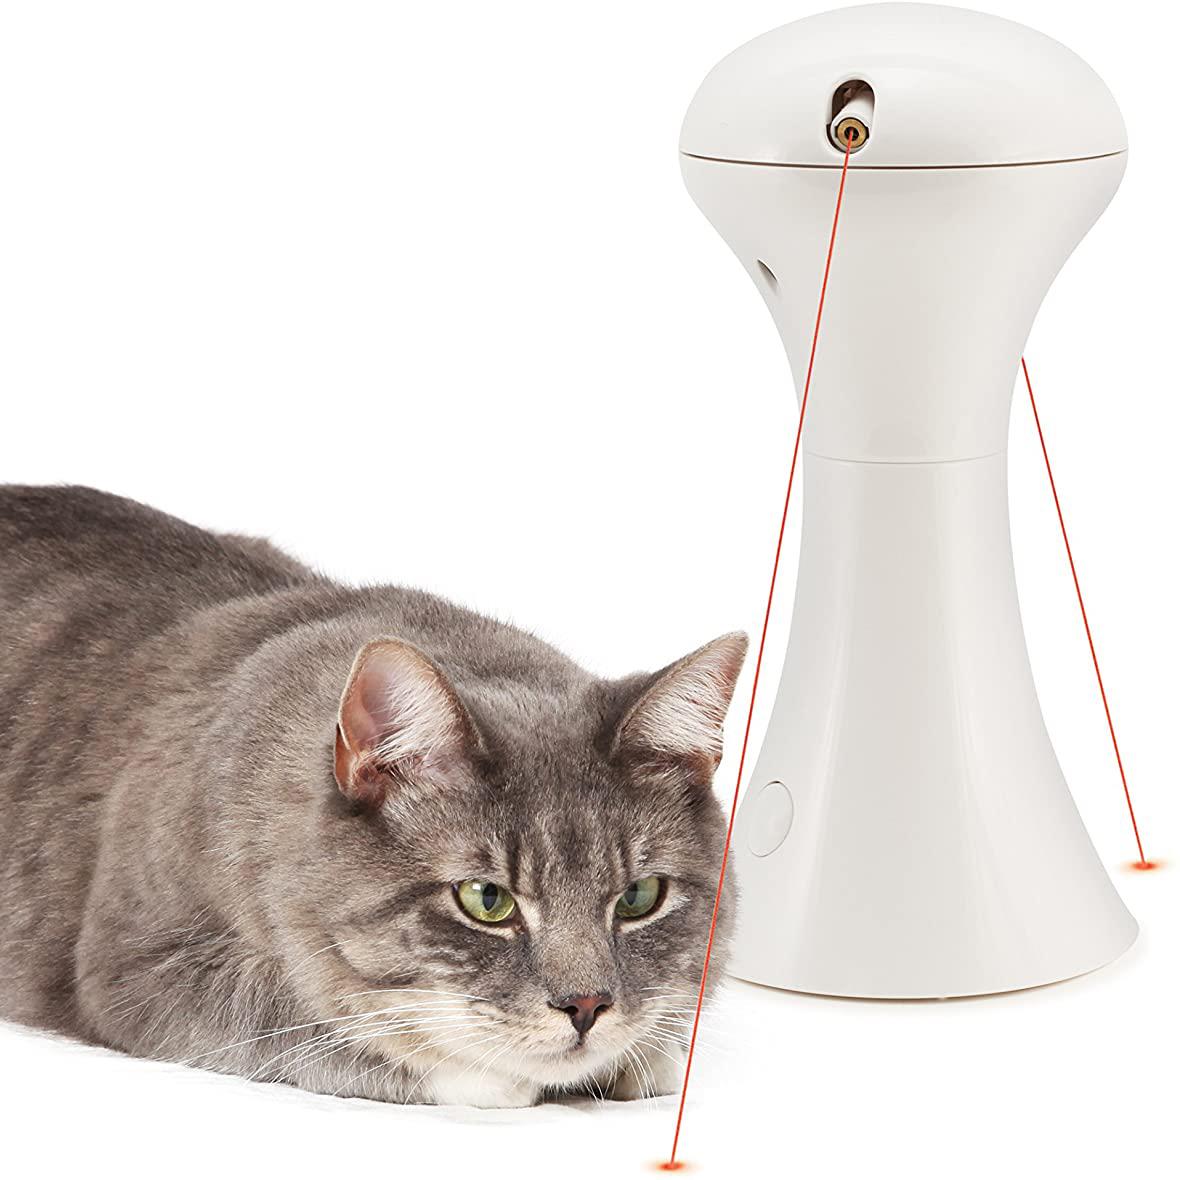 Cat Laser With Auto Switch Off & 360° Rotating Laser by Geezy - The Magic Toy Shop